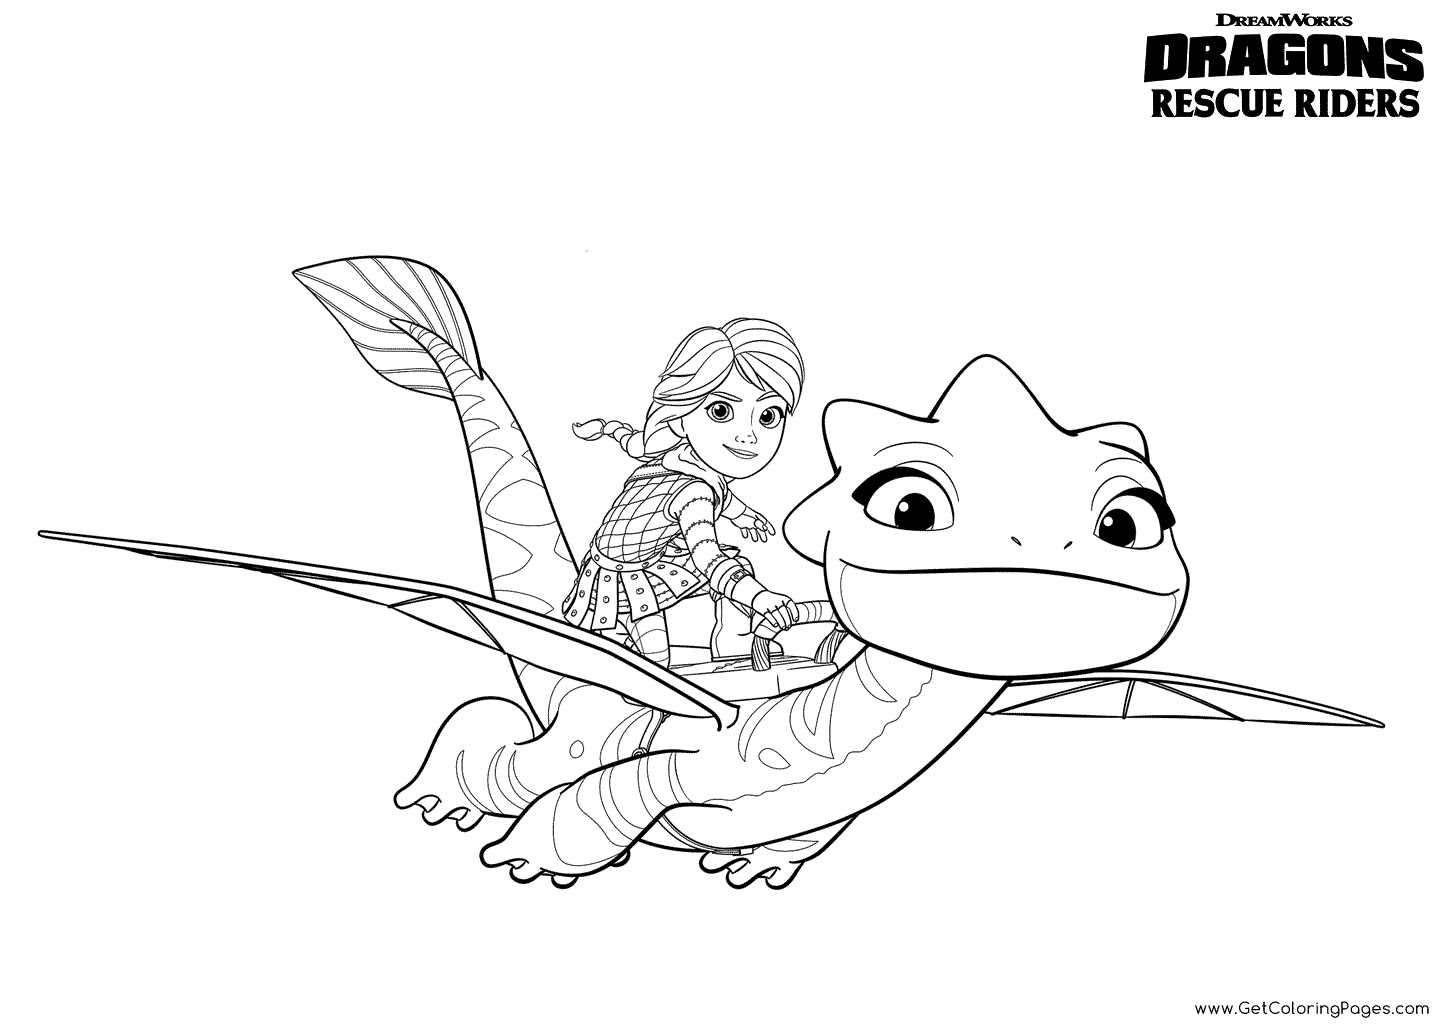 Dragons Rescue Riders Coloring Pages - Get Coloring Pages